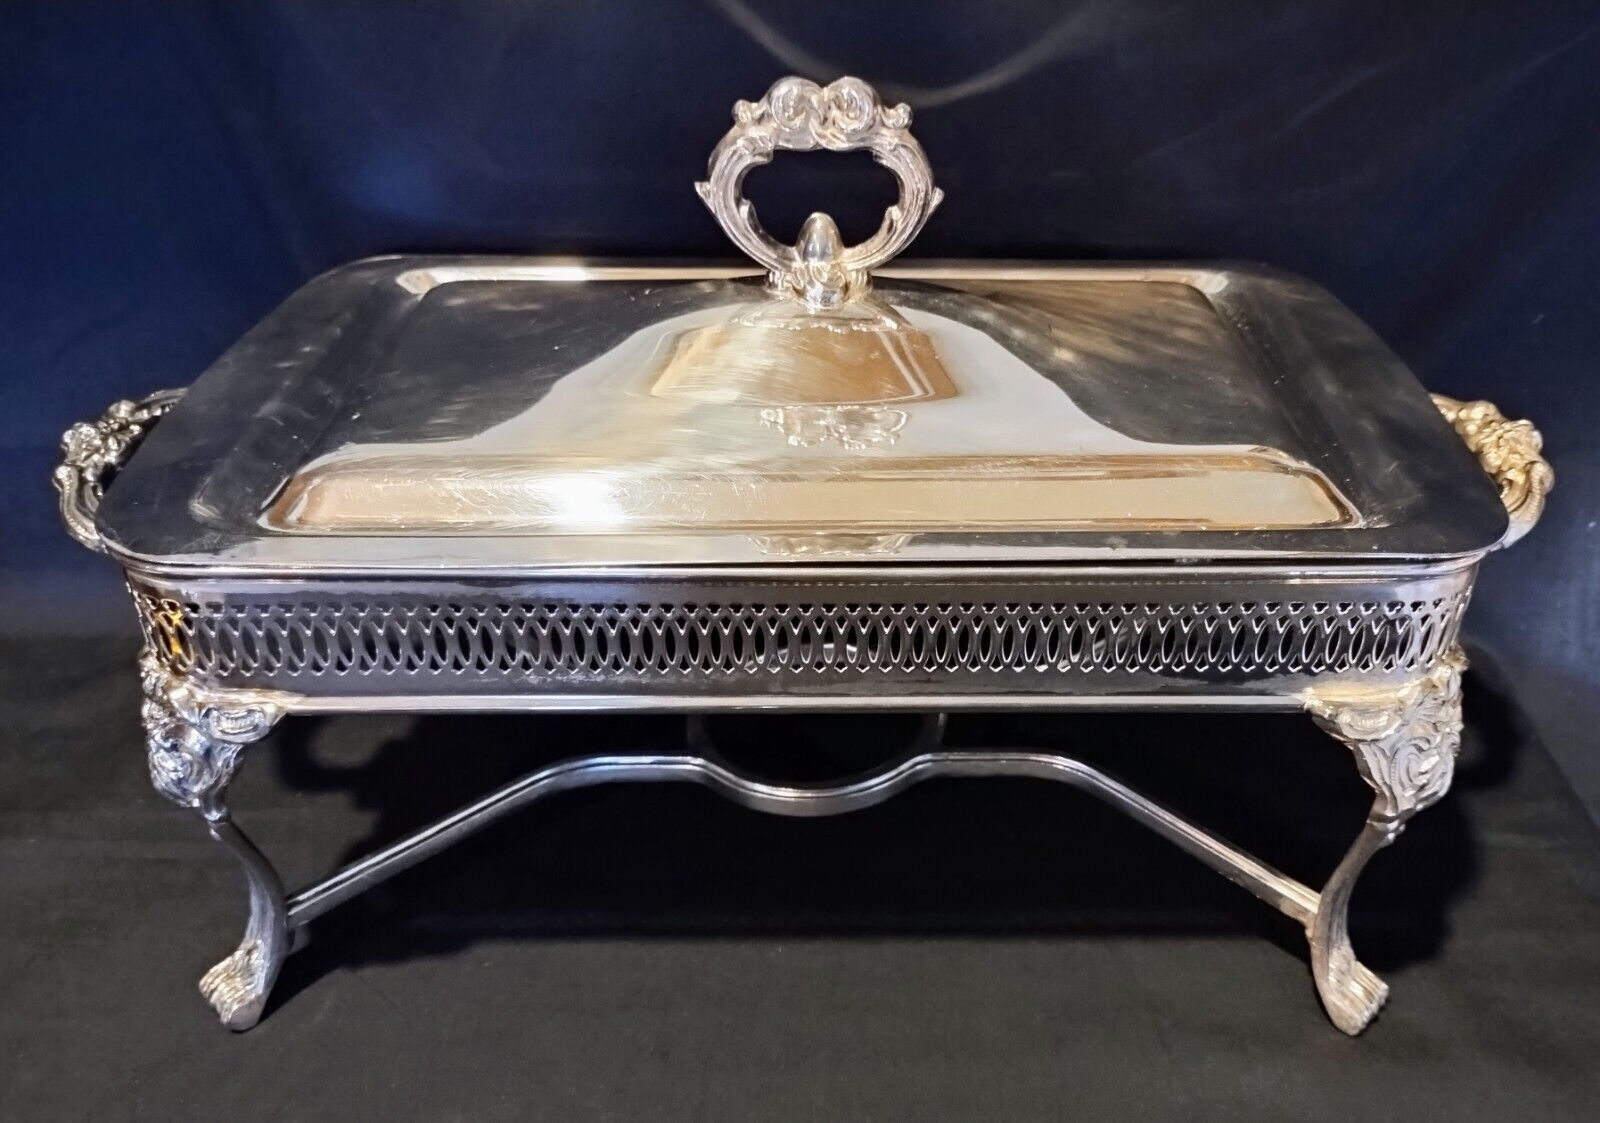 Large International Silver Plated Footed Food Warmer Server Stand w/ Dome Lid